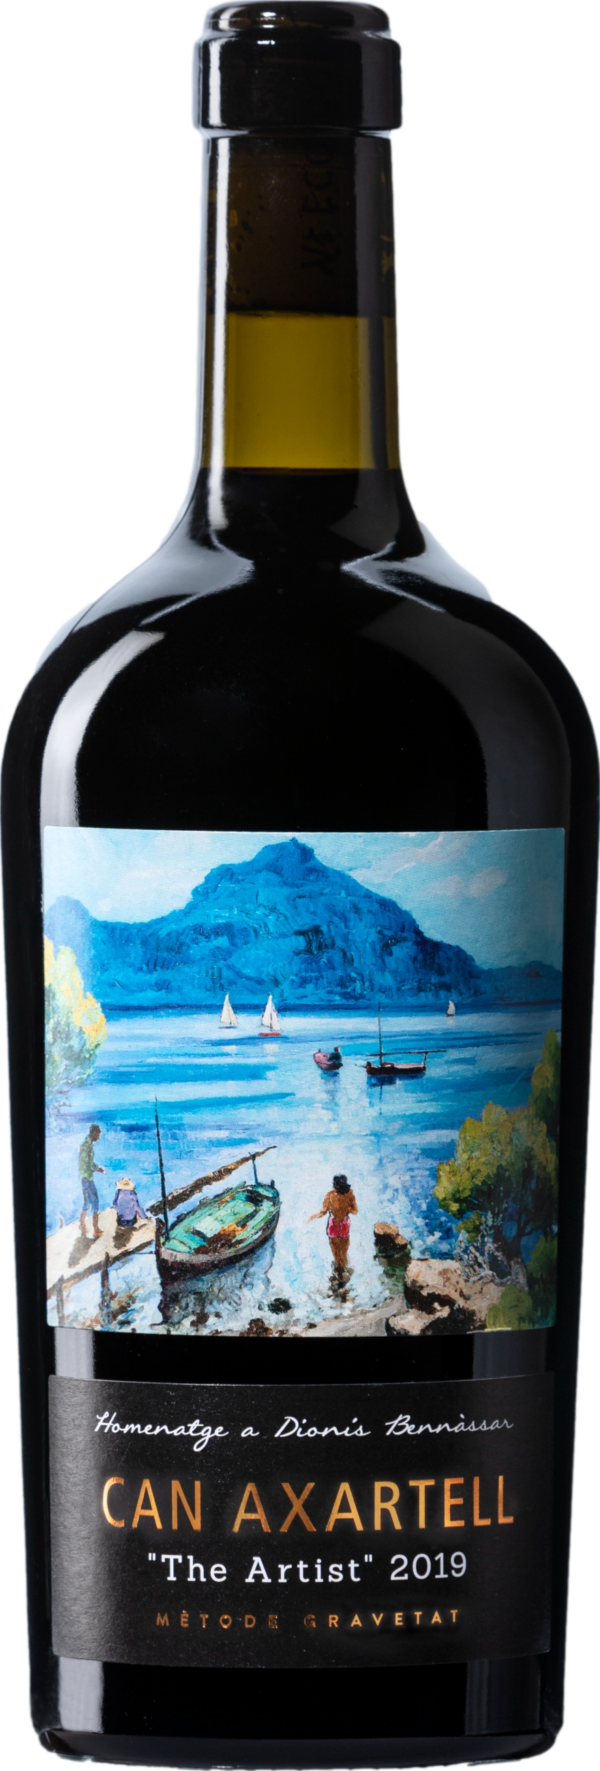 Product image of Can Axartell The Artist 2019 from 8wines